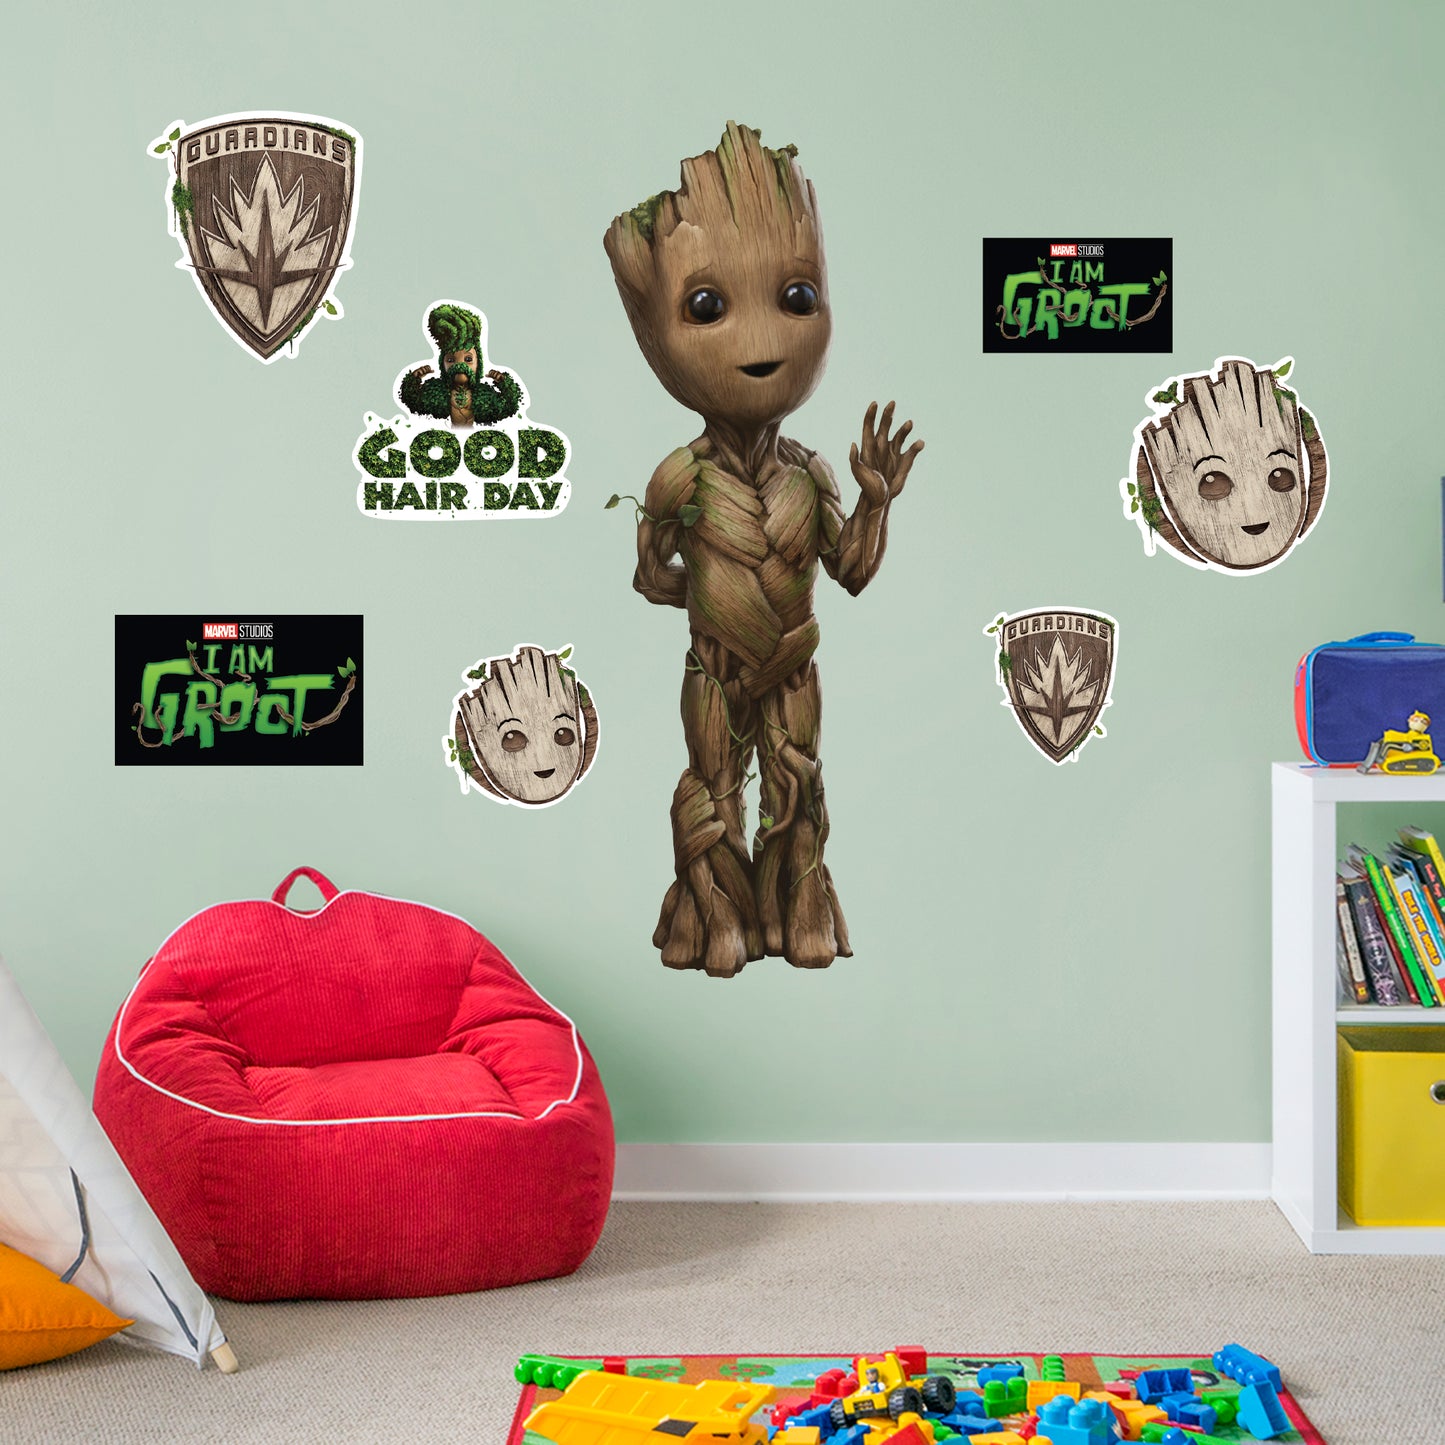 I am Groot: Groot RealBig        - Officially Licensed Marvel Removable     Adhesive Decal